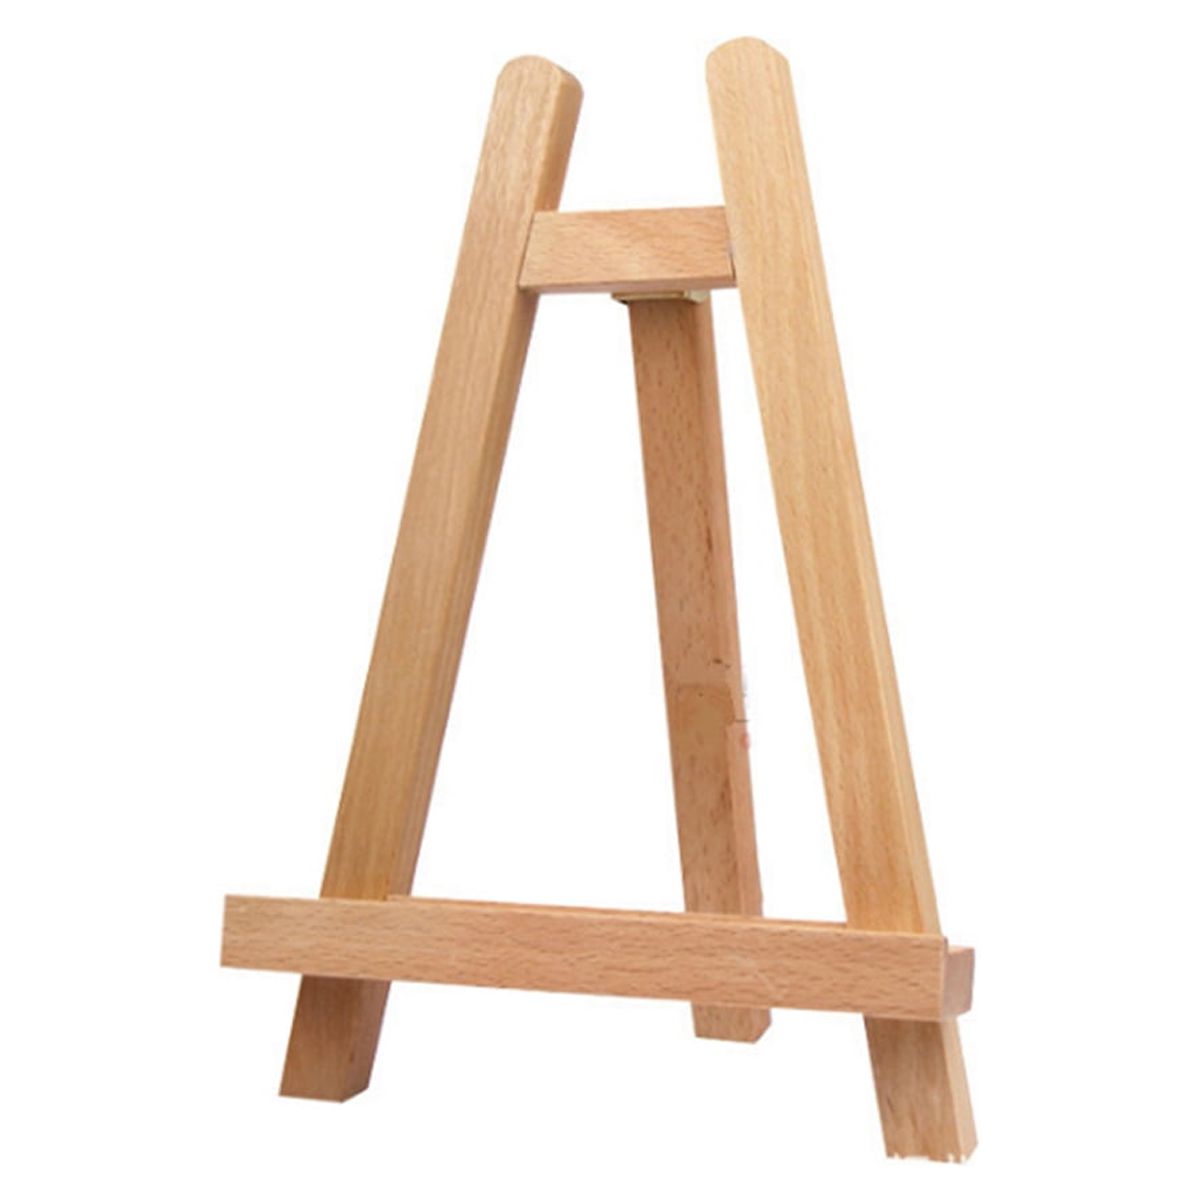 27.5cm Mini Wood Display Easel Tabletop Easel Artist A-Frame Easel Photo Painting Portable Tripod Holder Stand, Size: 11.42 x 11.02 x 1.97